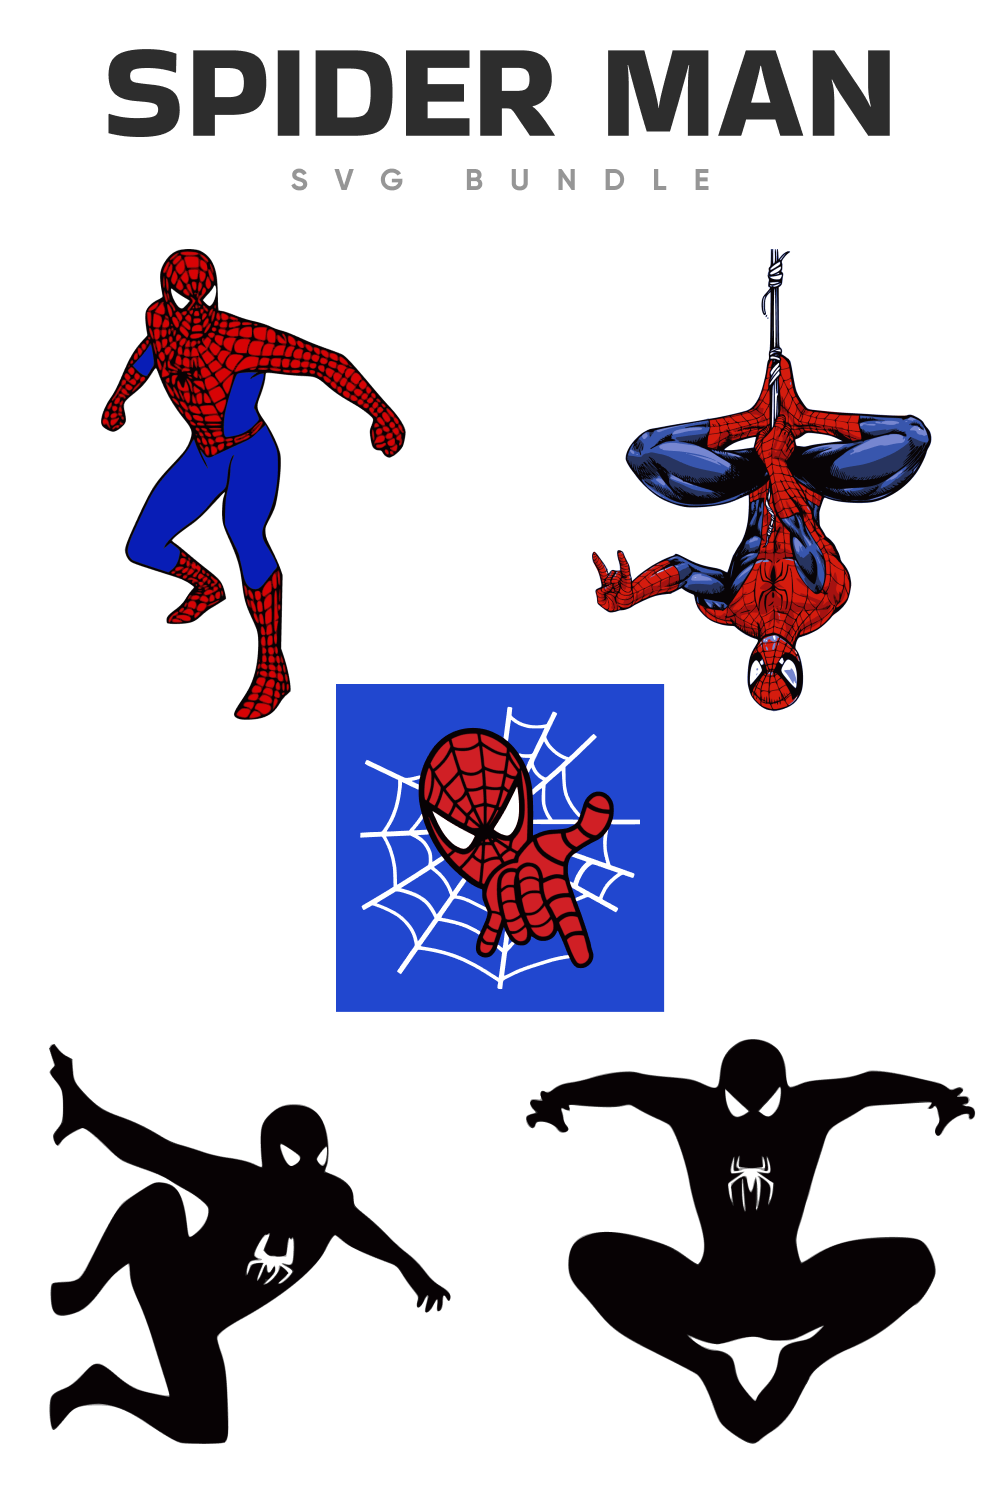 Active spider man in the different poses.